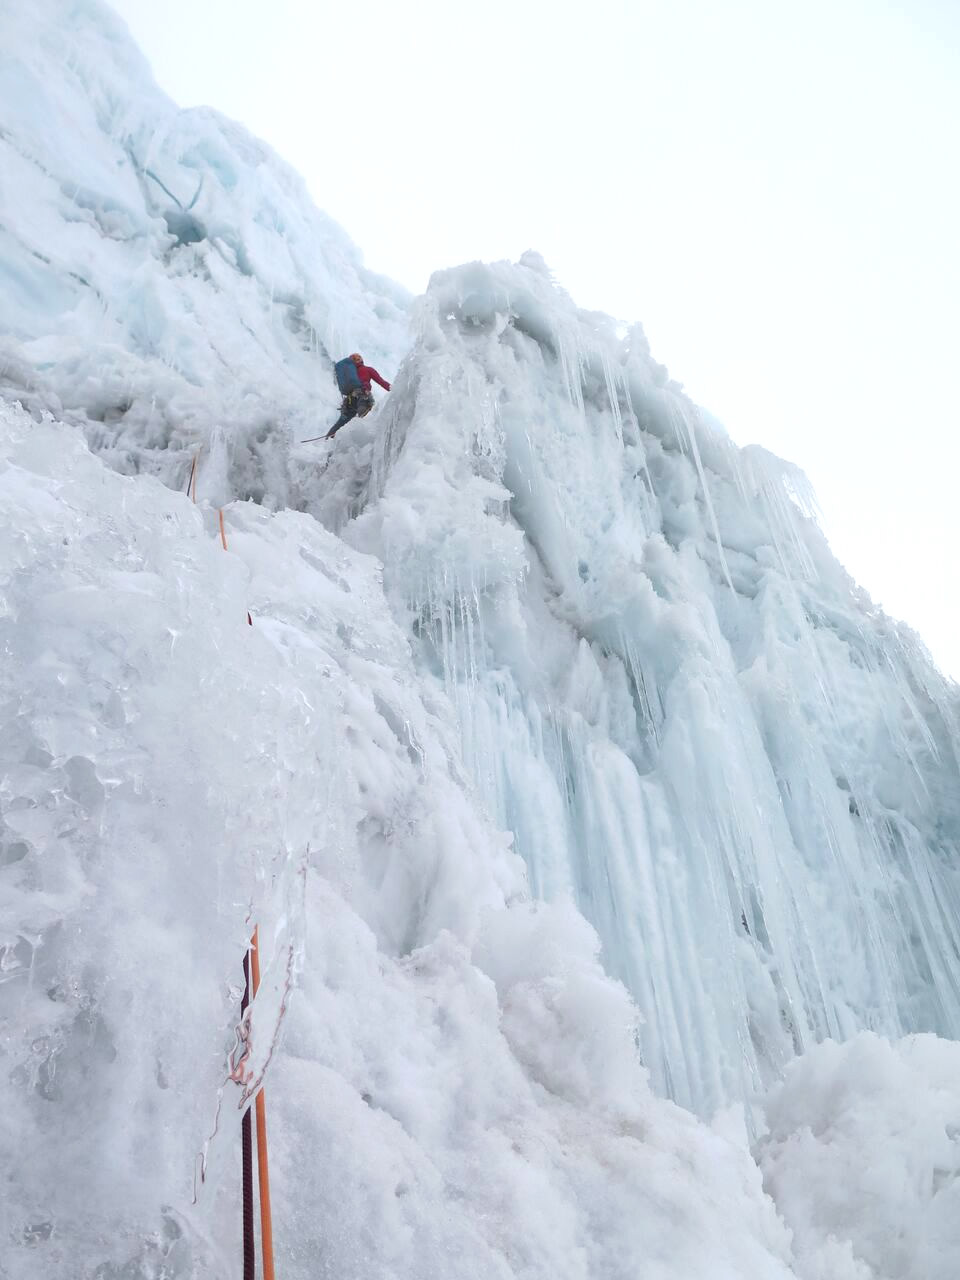 Ben Dare navigating the final overhanging ice pitch which topps out directly on the summit. [Photo] Steve Skelton